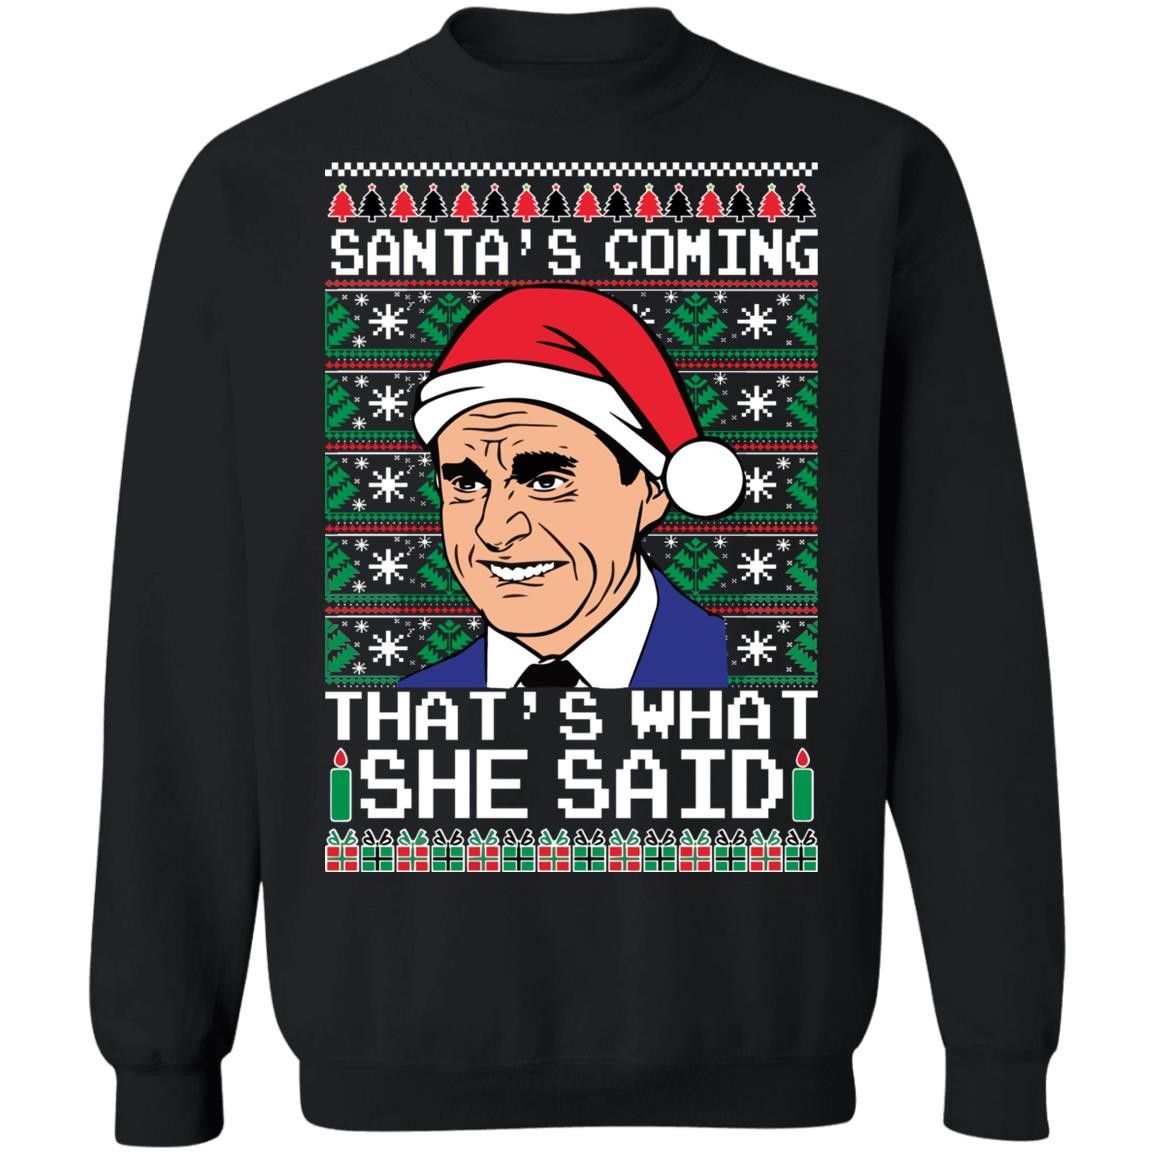 That’s What She Said – The Office Christmas Sweater – Crew Neck Sweatshirt (Unisex)